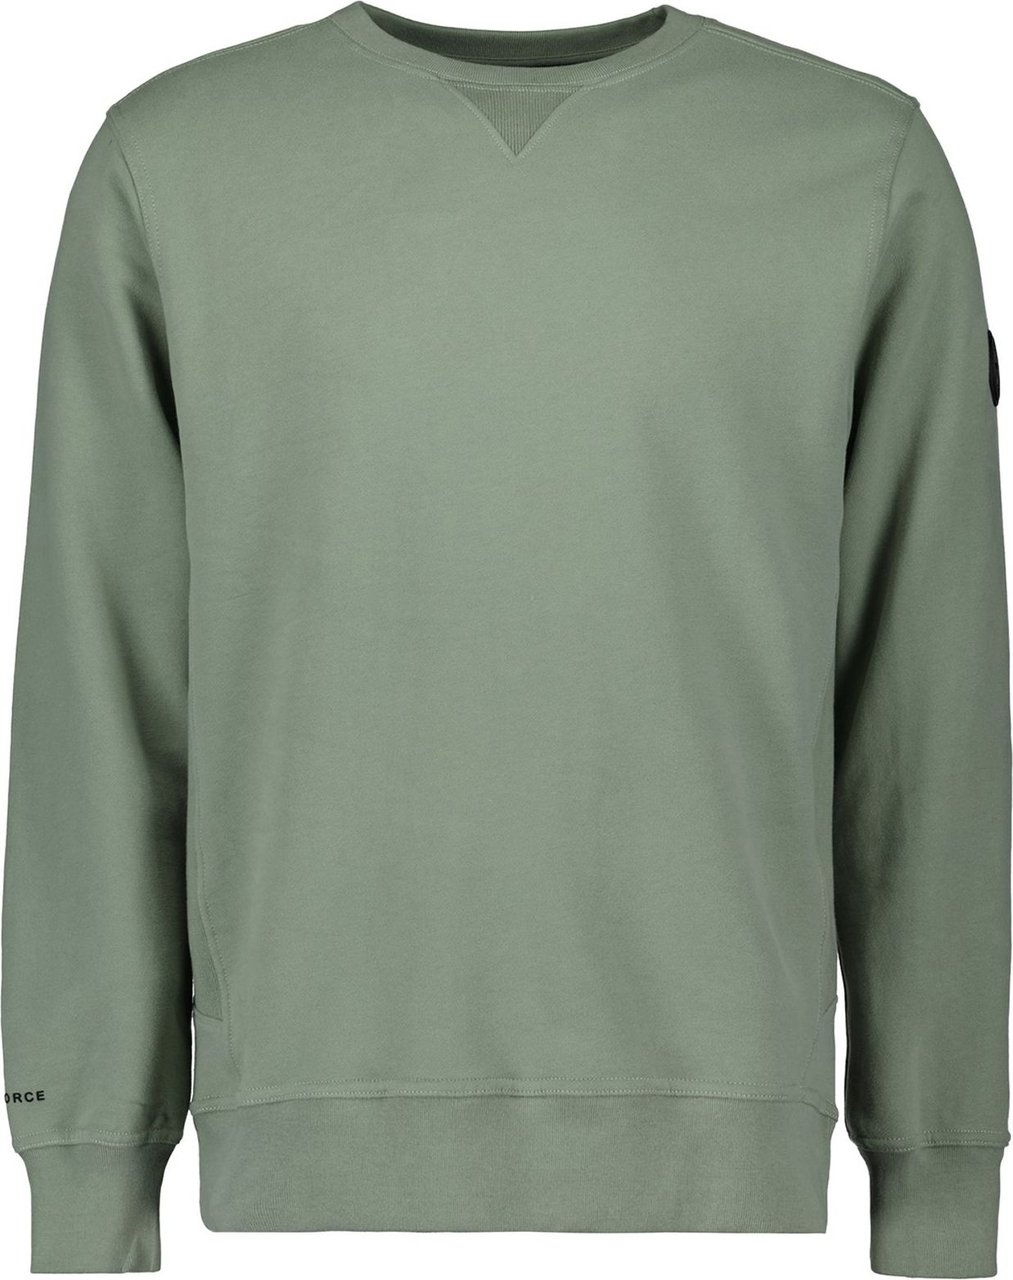 Airforce Sweater Lily Pad Groen